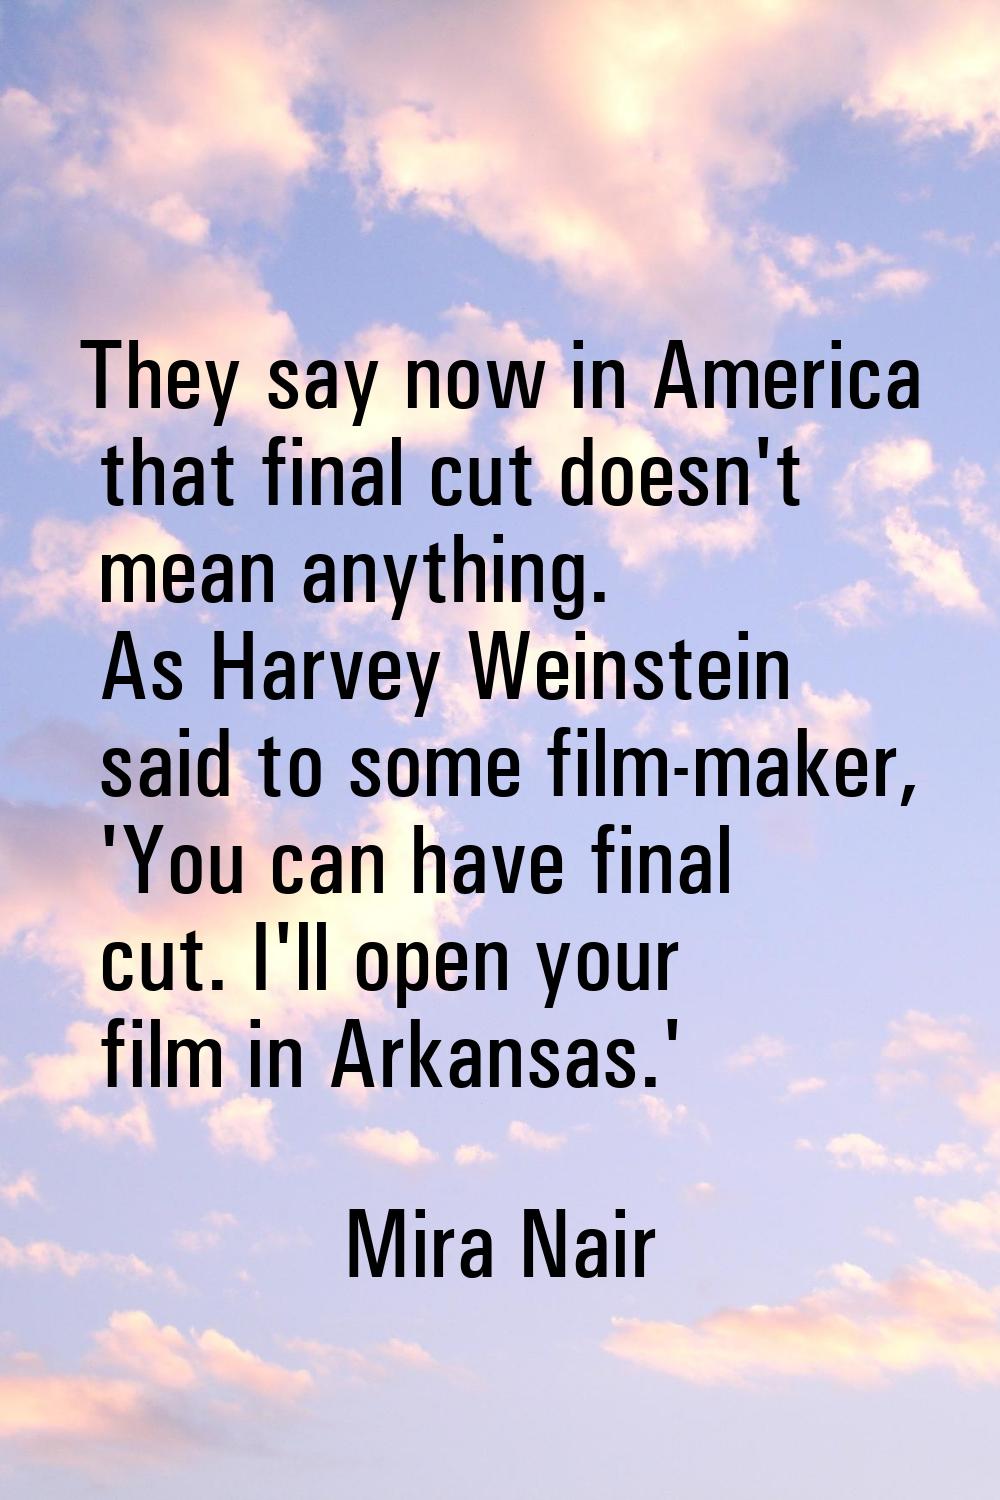 They say now in America that final cut doesn't mean anything. As Harvey Weinstein said to some film